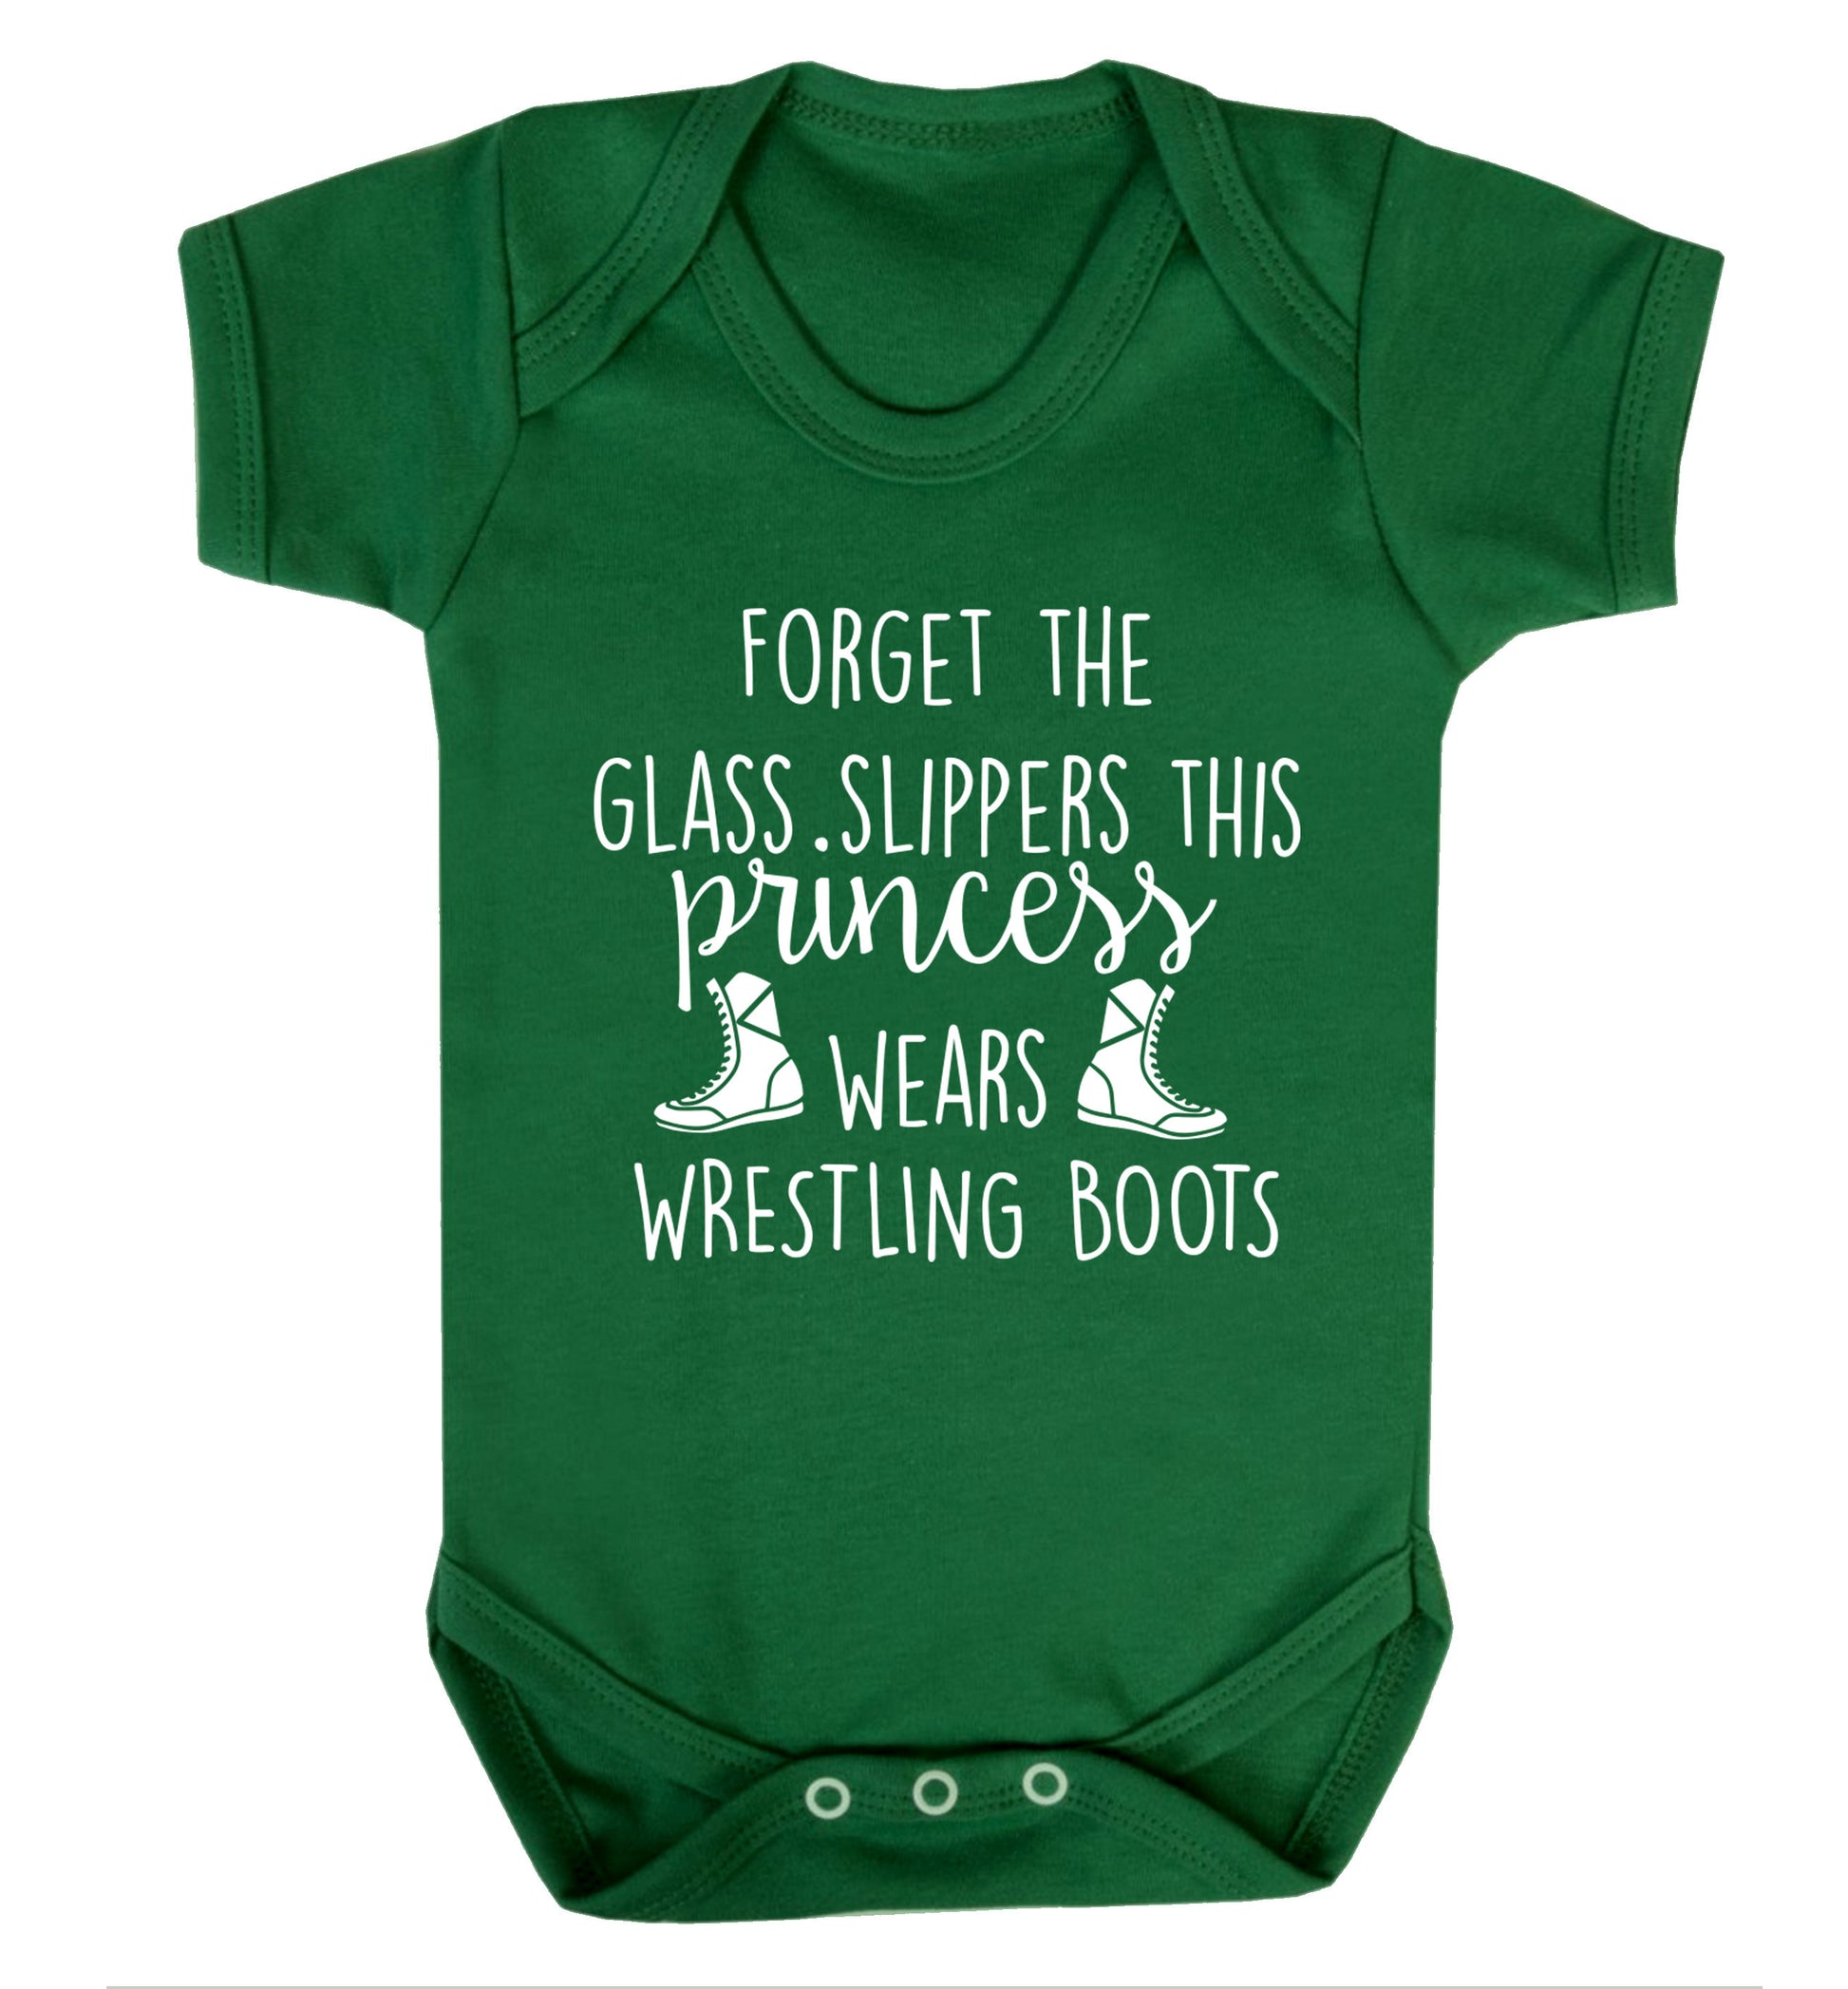 Forget the glass slippers this princess wears wrestling boots Baby Vest green 18-24 months